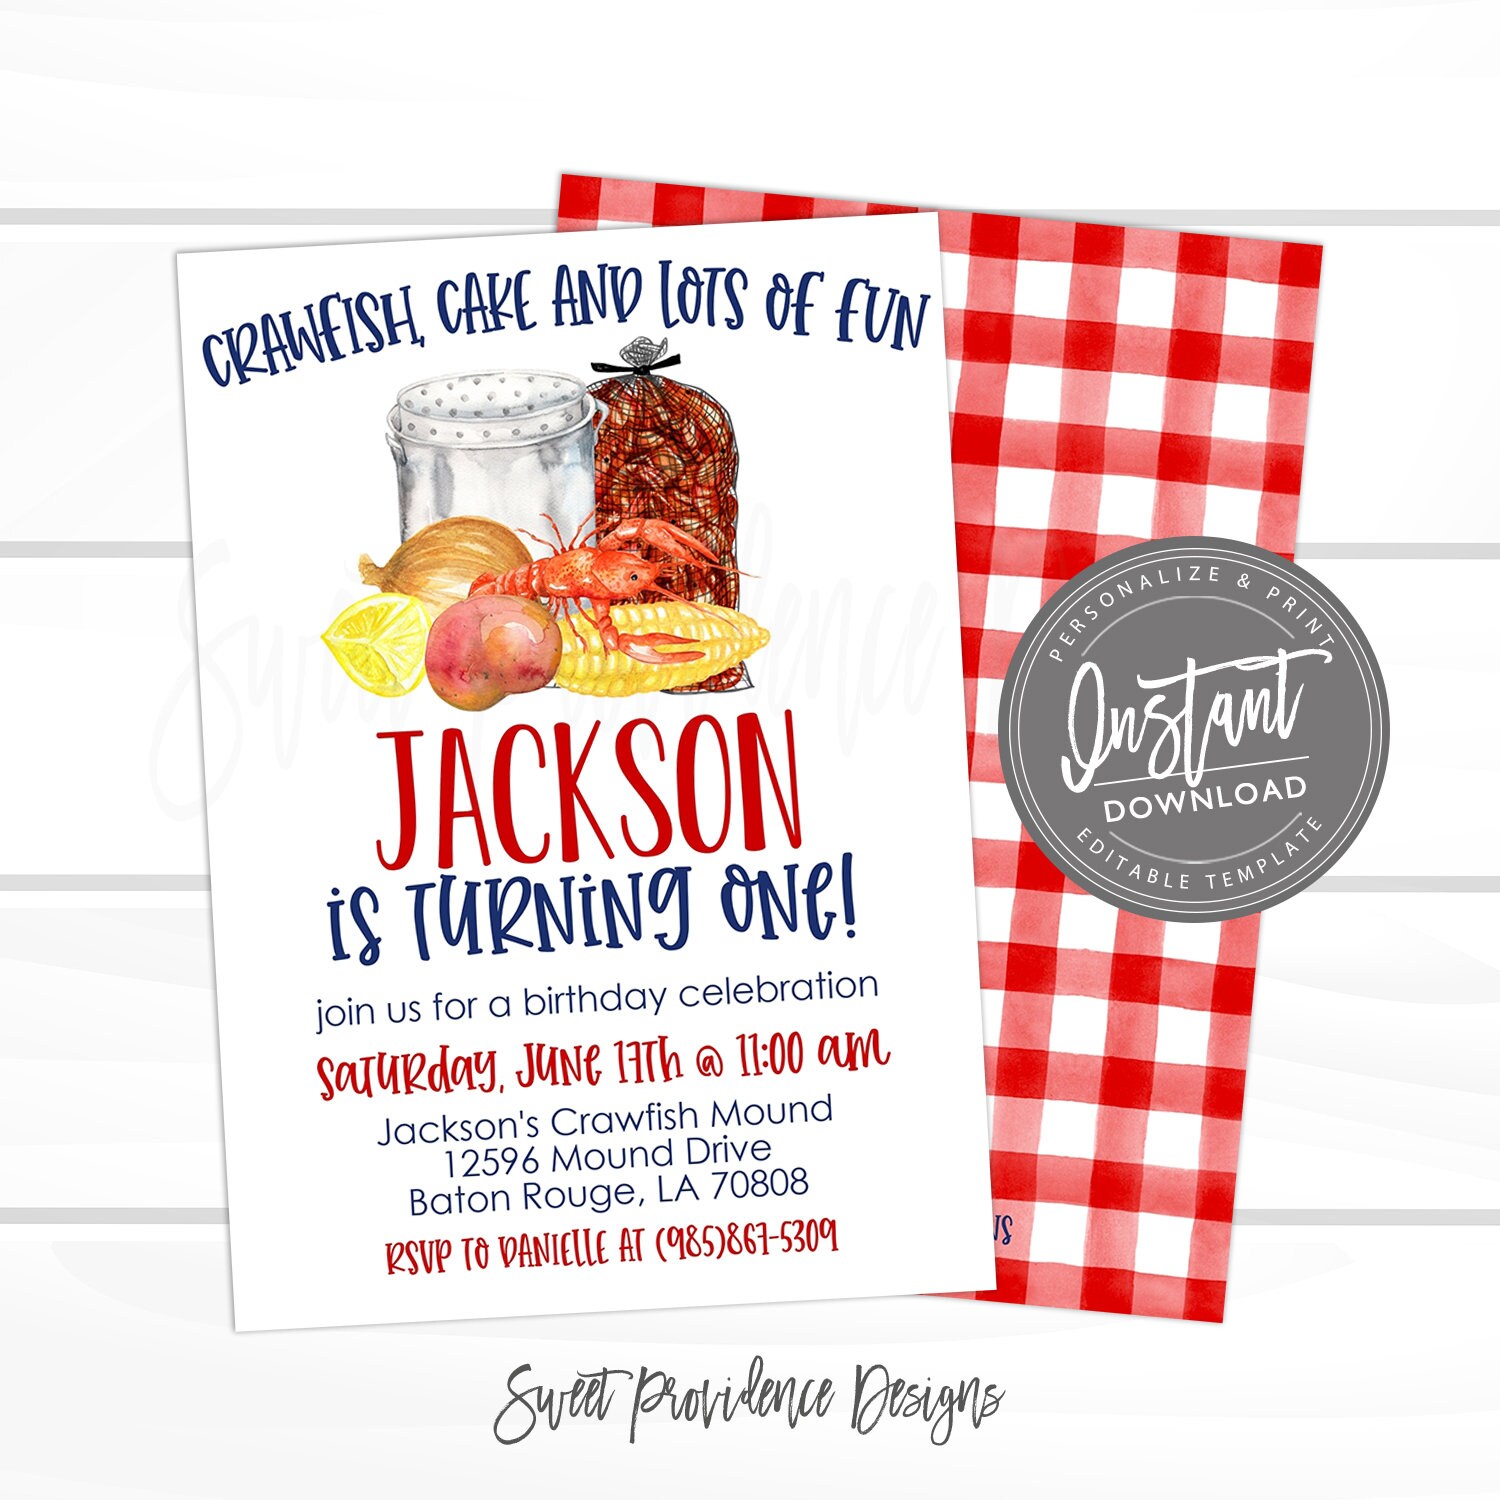 Crawfish Boil Birthday Invitation, Editable Kids Boil, First Birthday, Seafood Invite, Any Age, Printable Instant Access Edit Now